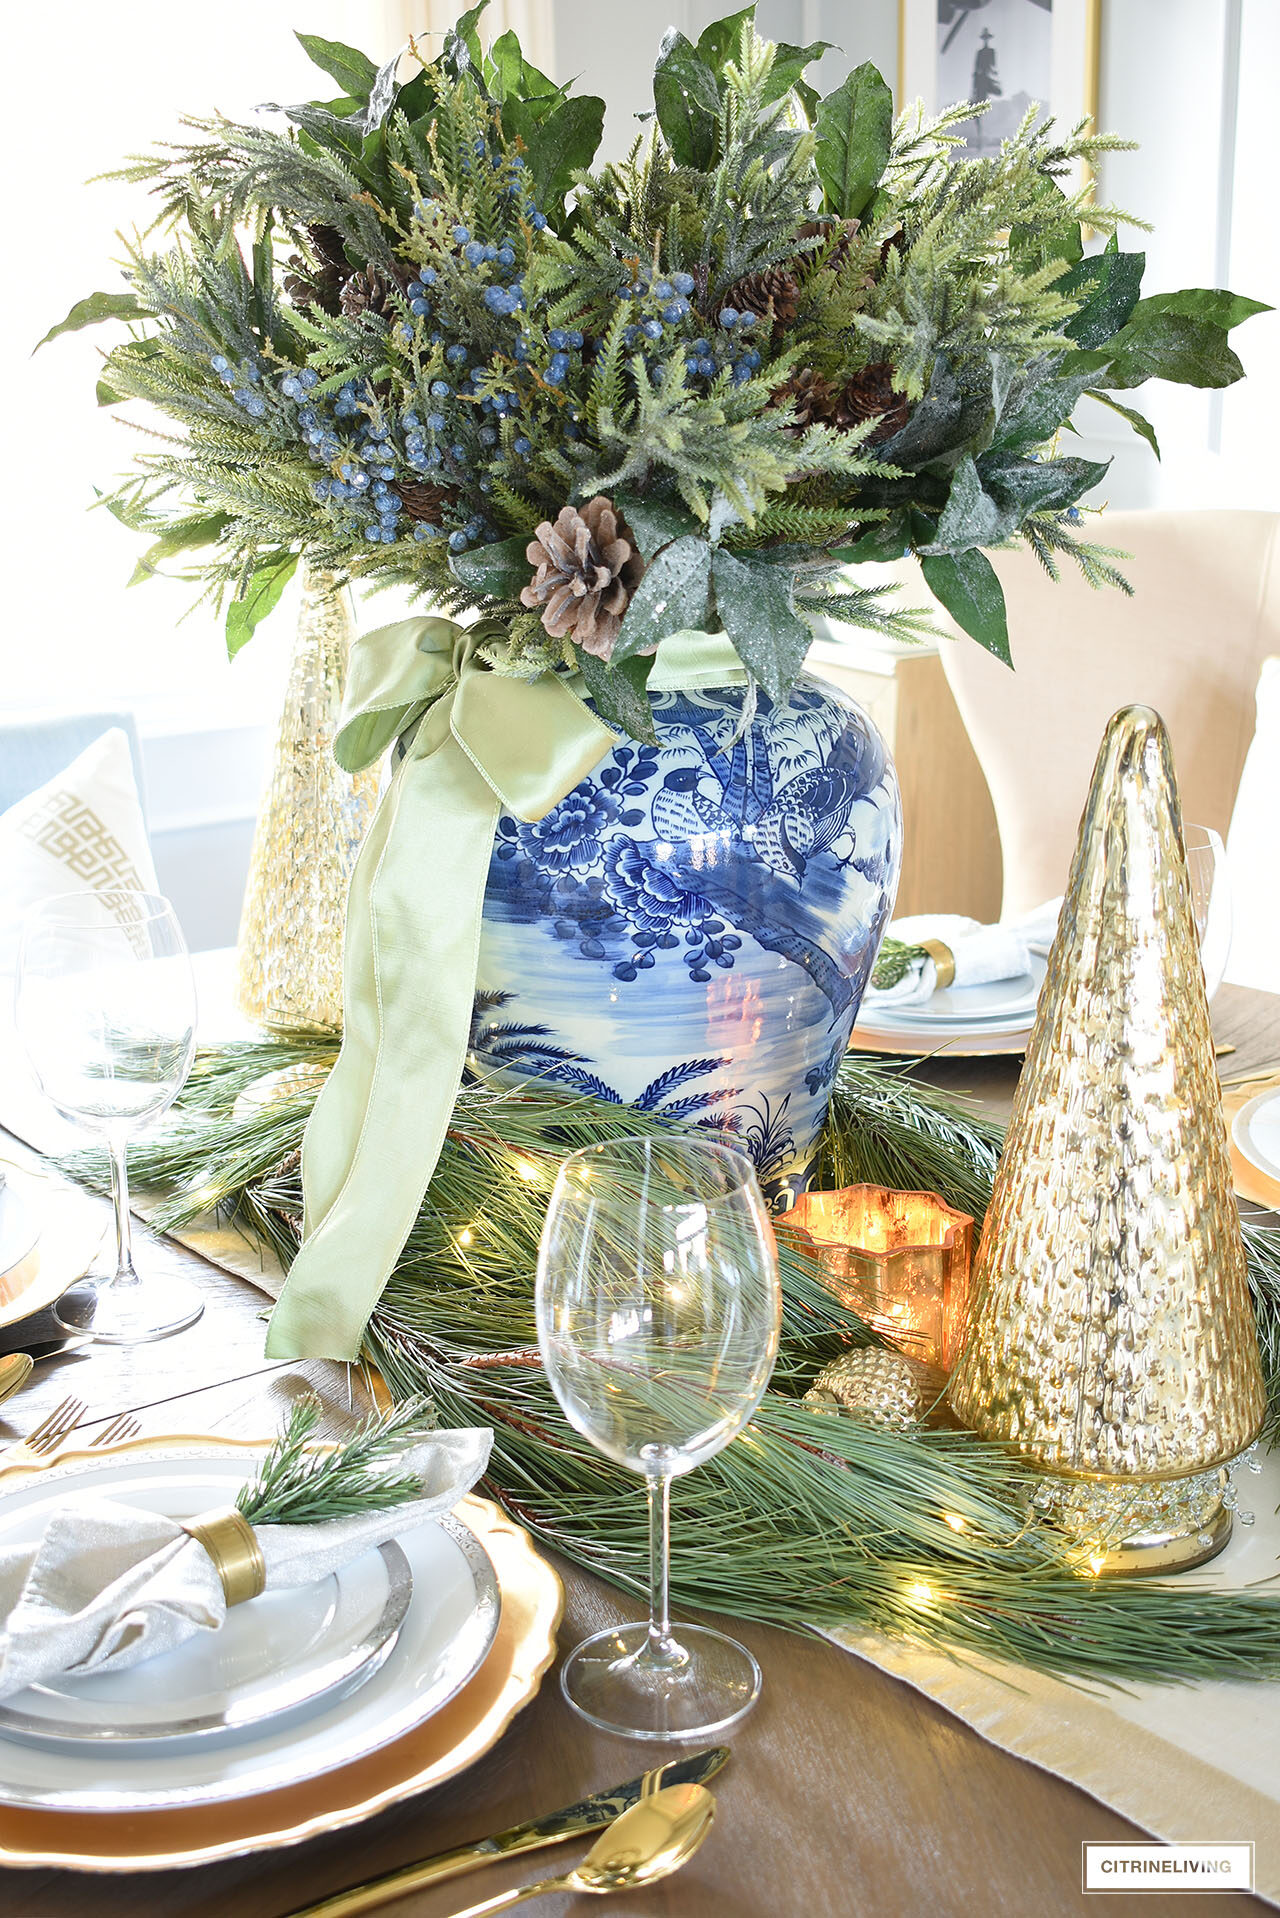 Christmas tablescape with greenery, silver, gold and blue and white chinoiserie